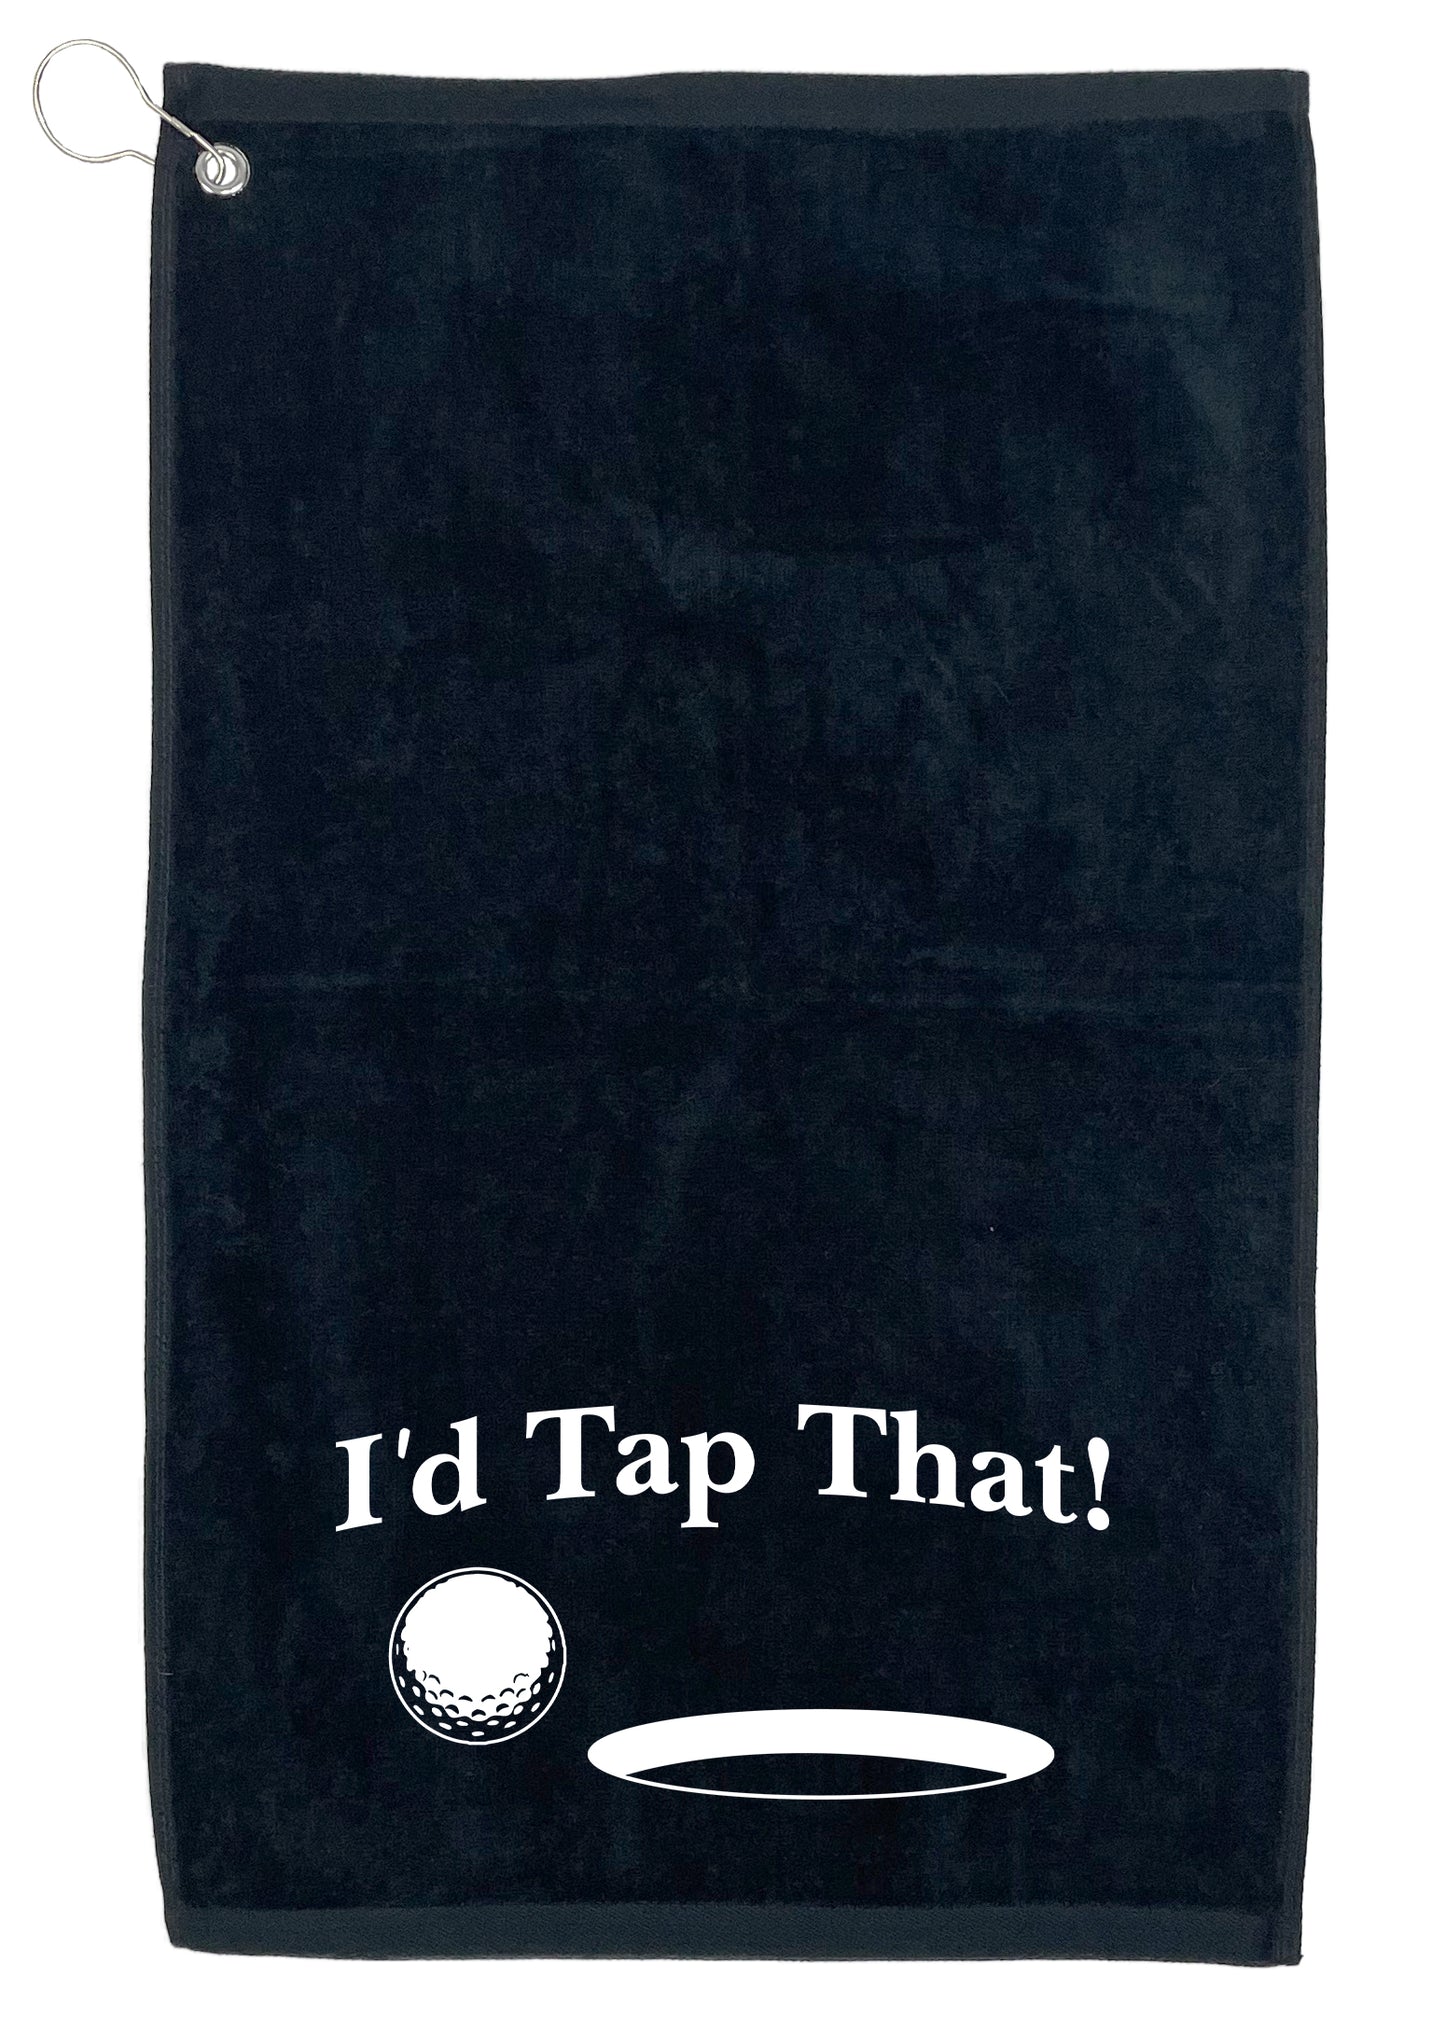 I'd Tap That! Golf Towel - Funny T Shirts & Graphic Tees